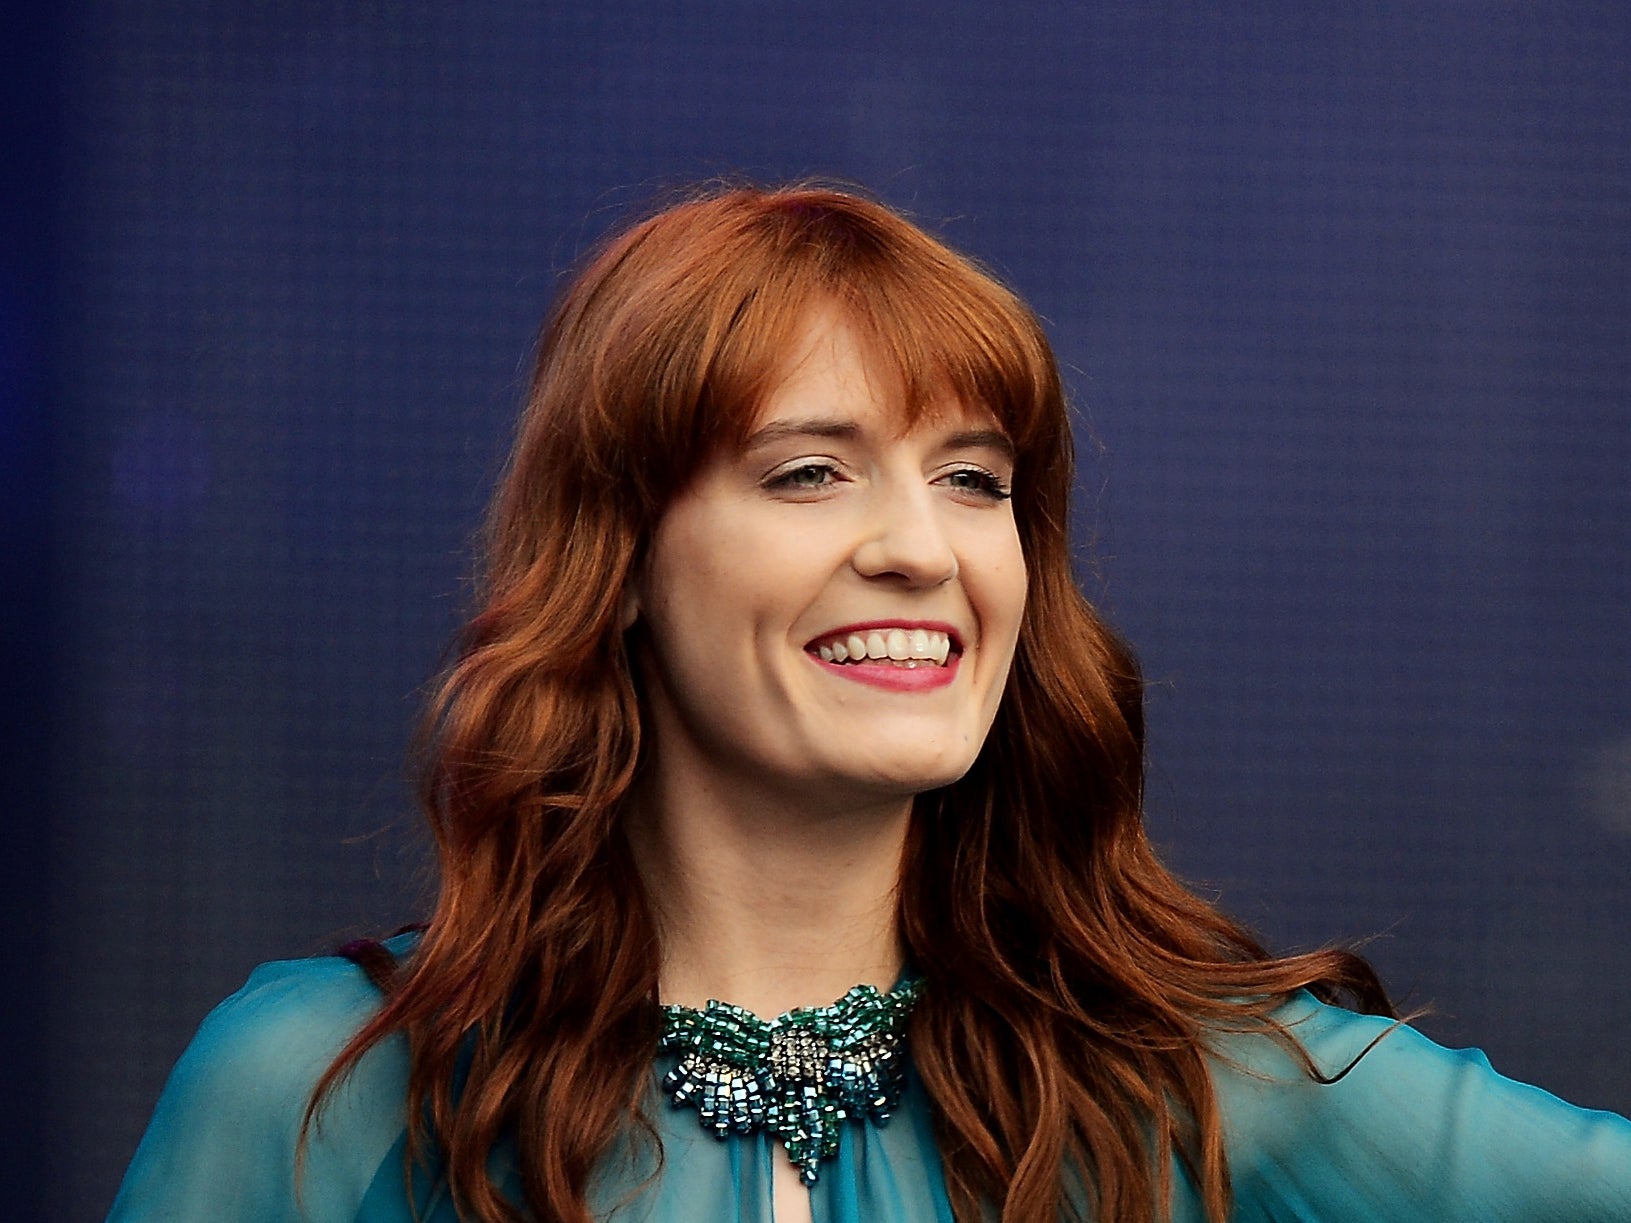 Florence Welch of Florence + the Machine